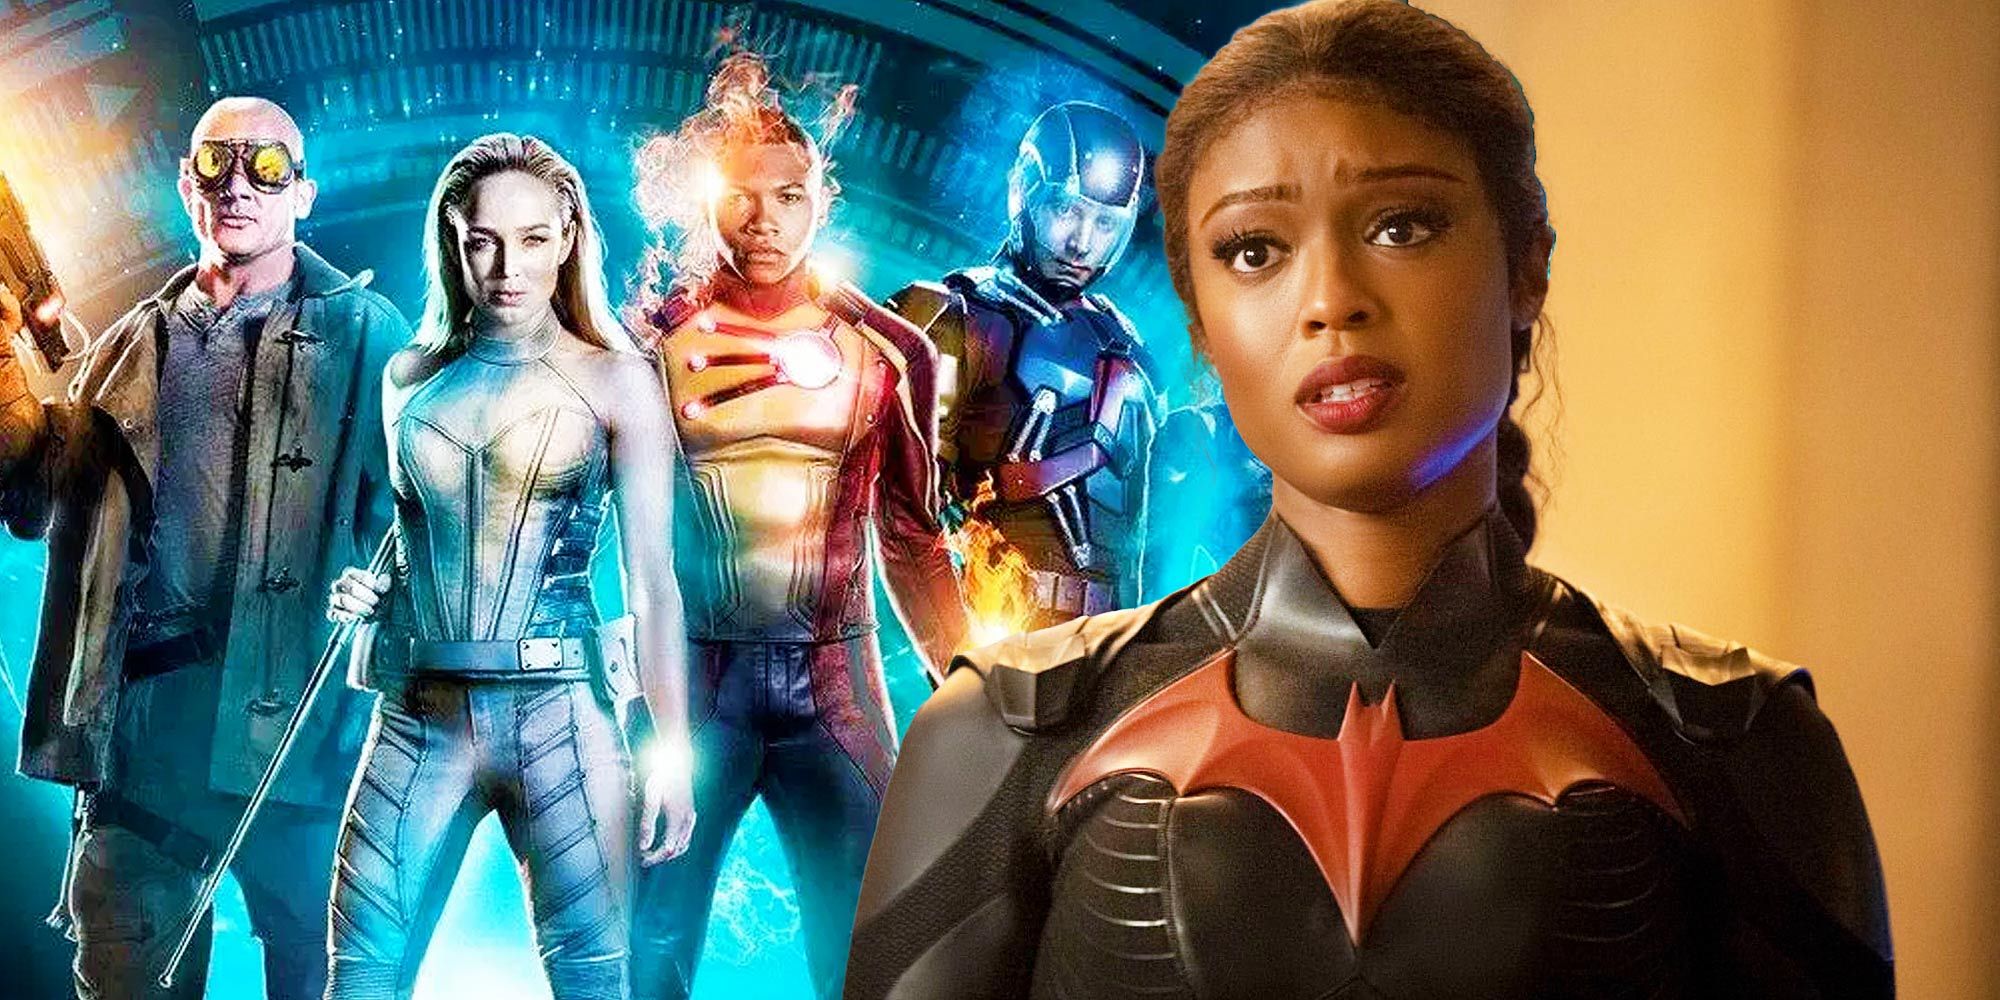 Batwoman and Legends of tomorrow cancellation details